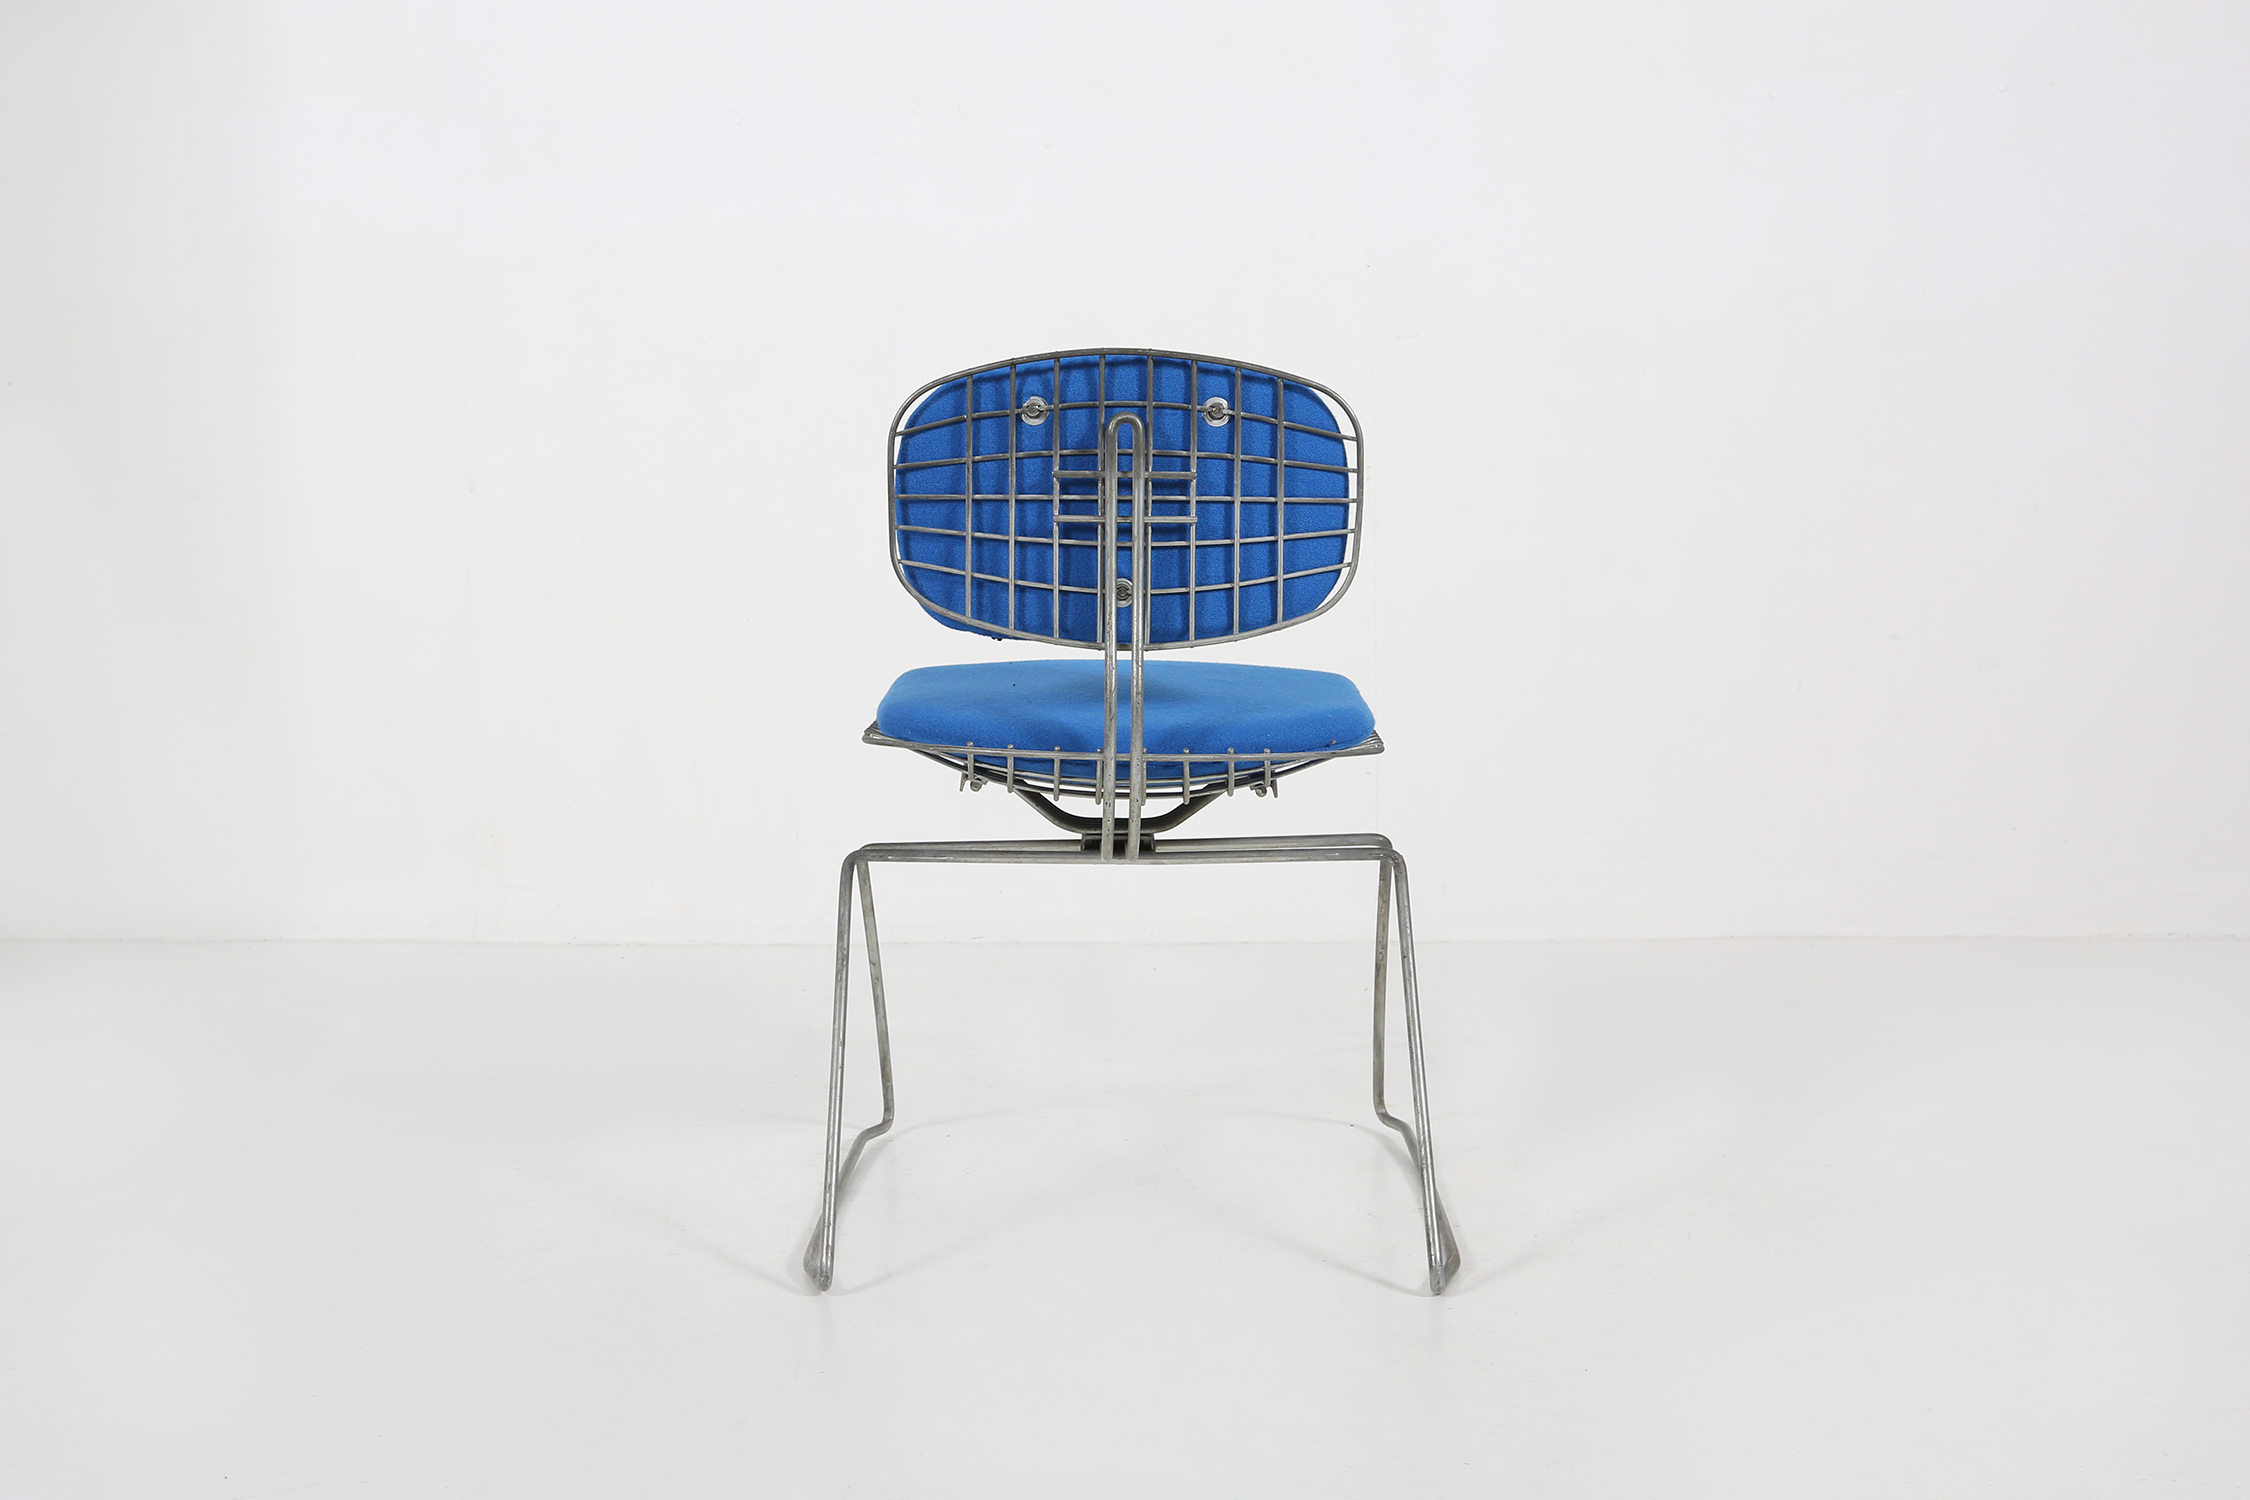 Beaubourg Chair by Michel Cadestin for the Pompidou Centre